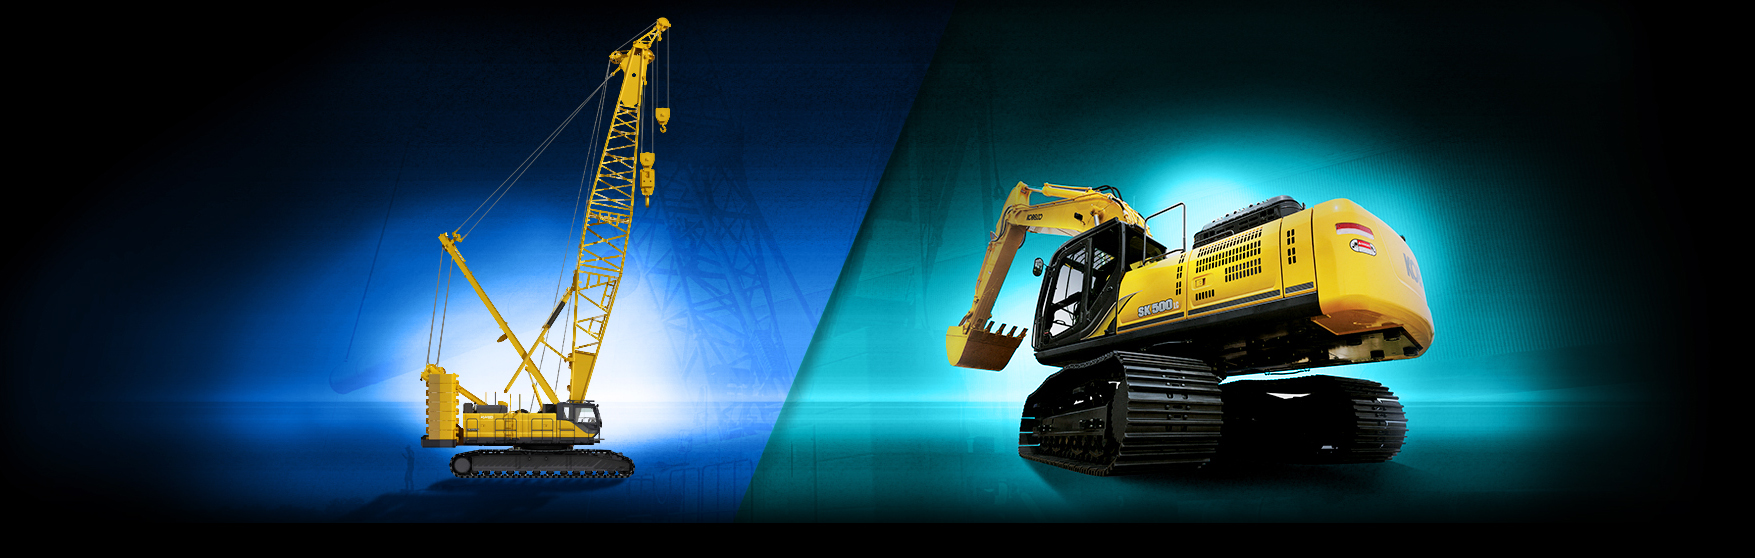 Let's talk about painting cranes and painting excavators. How do you achieve a professional finish?